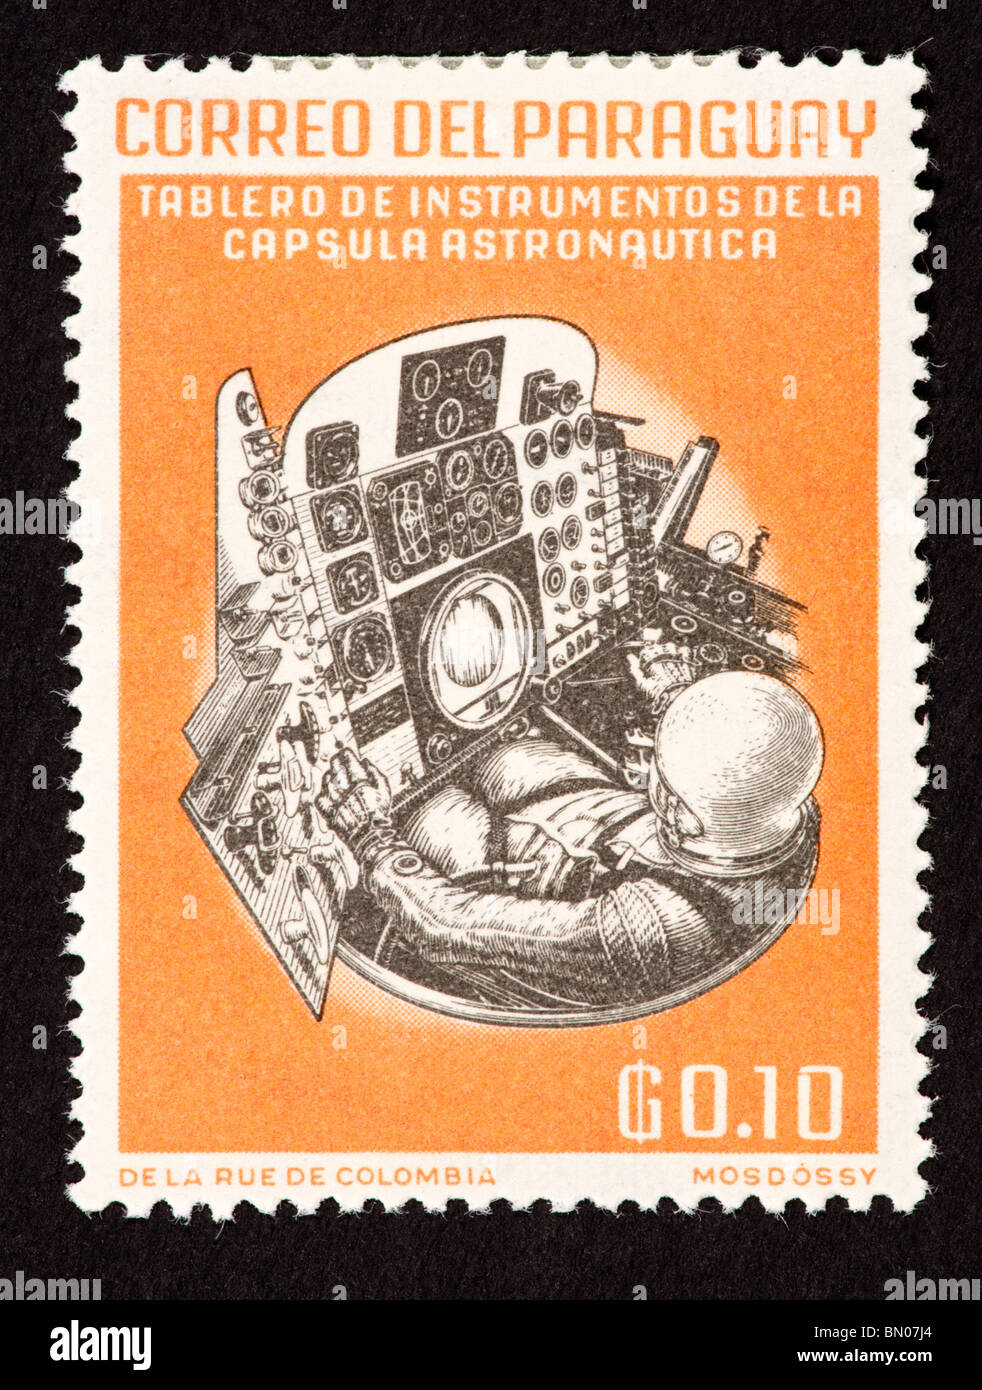 Postage stamp from Paraguay depicting the control panel of a spacecraft and Walter Schirra Stock Photo